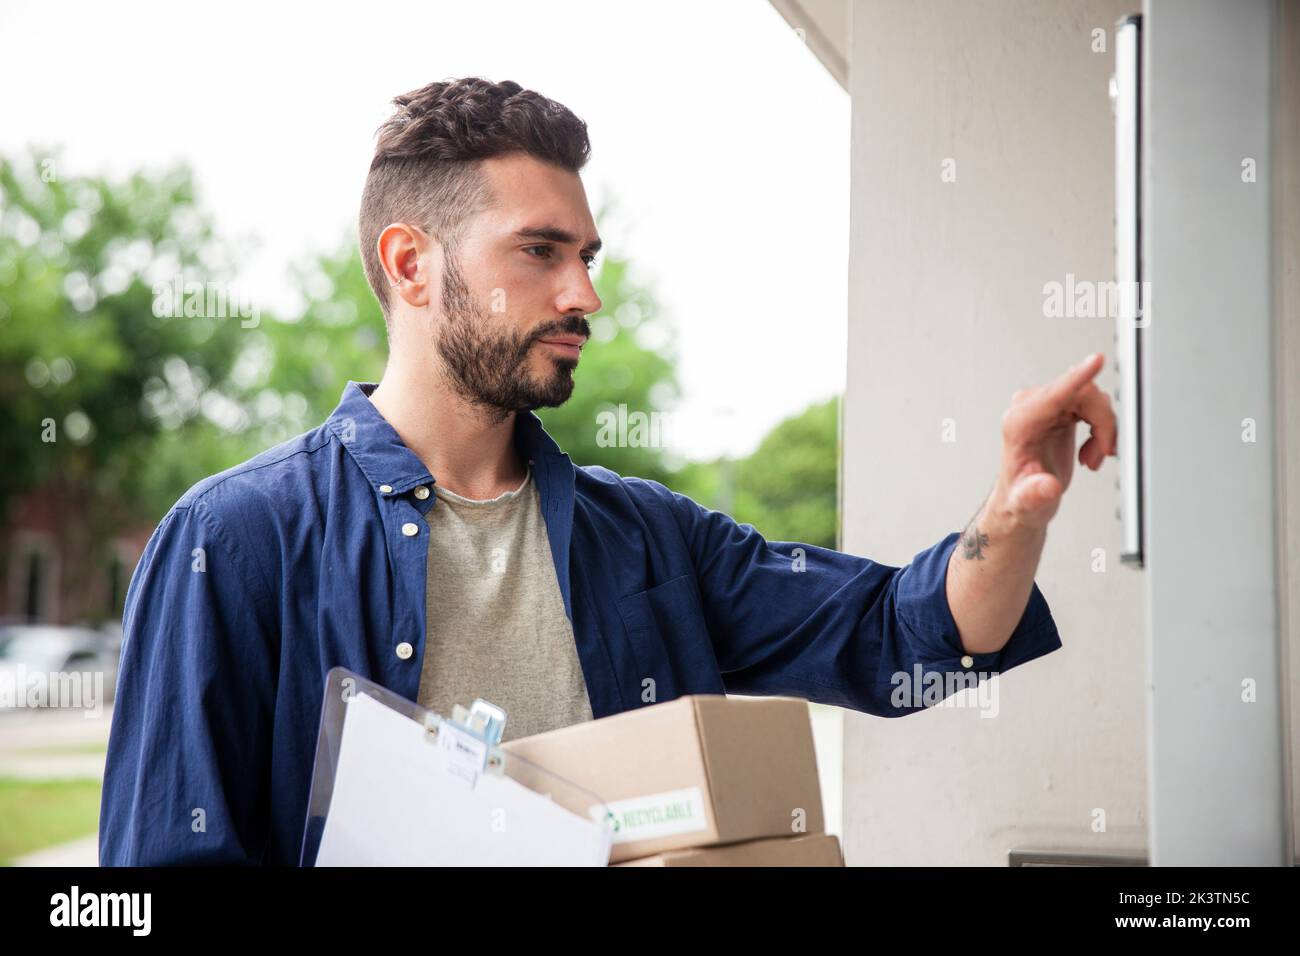 Delivery man standing in front of doorway while ringing doorbell Stock Photo